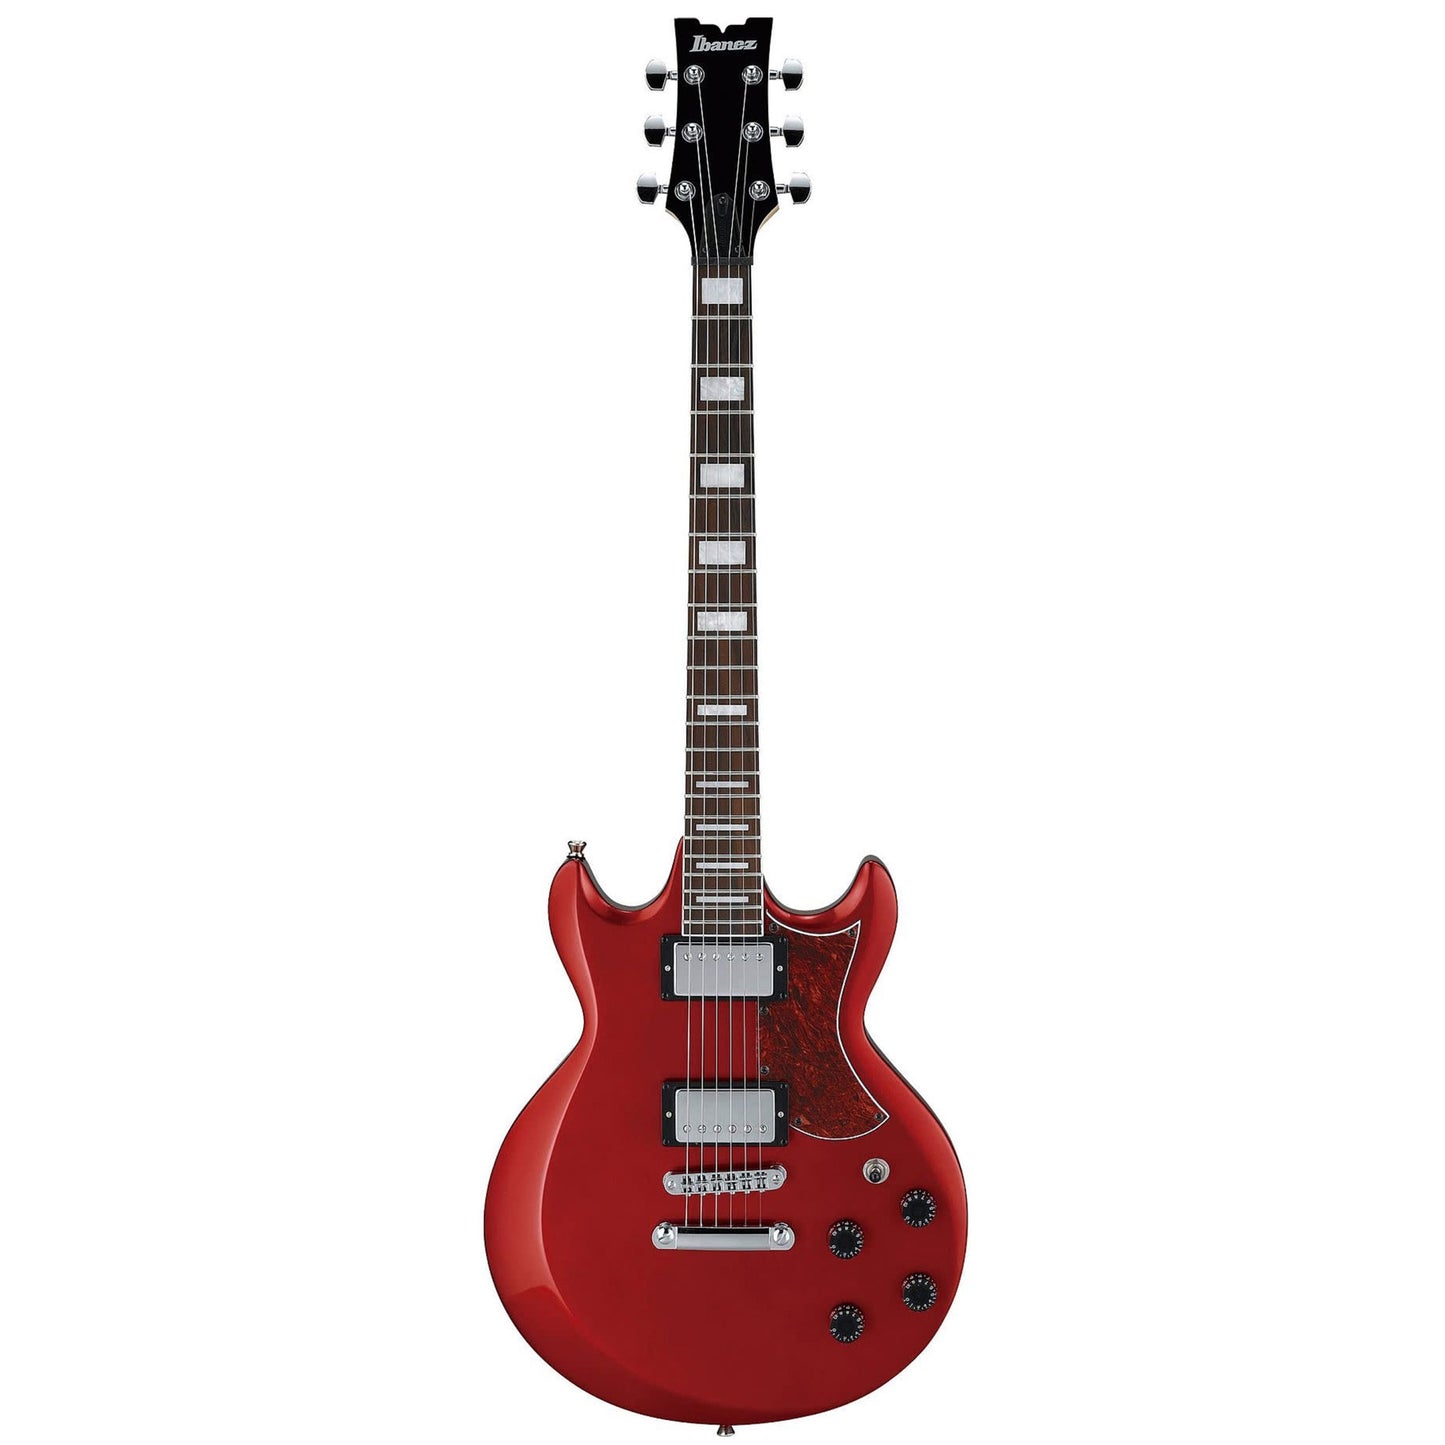 Ibanez AX120 Electric Guitar in Candy Apple Red